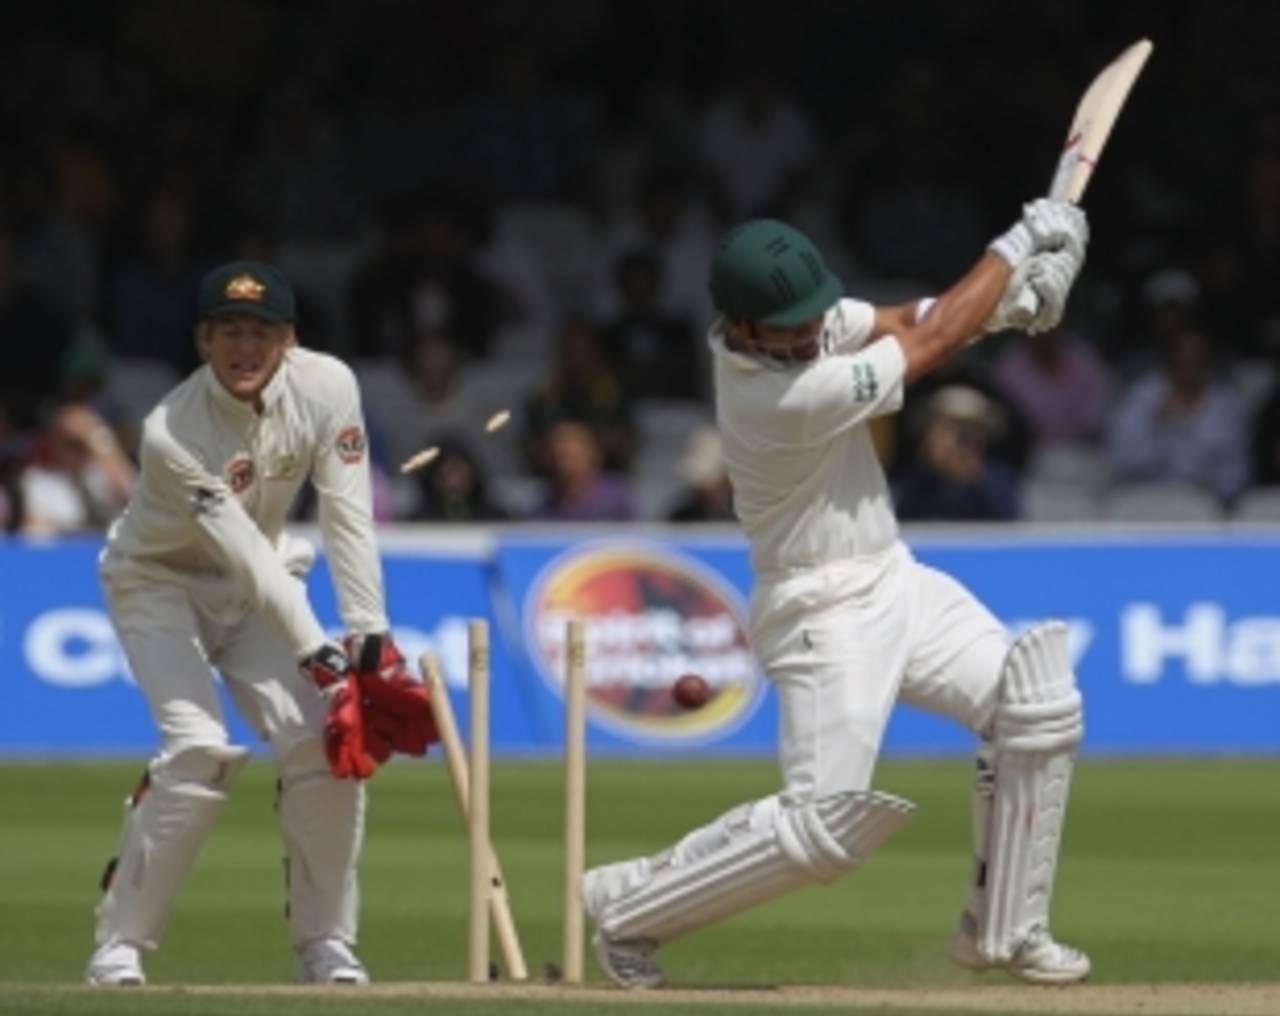 Kamran Akmal's swing across the line at Steven Smith was typical of how Pakistan subsided at Lord's&nbsp;&nbsp;&bull;&nbsp;&nbsp;Getty Images